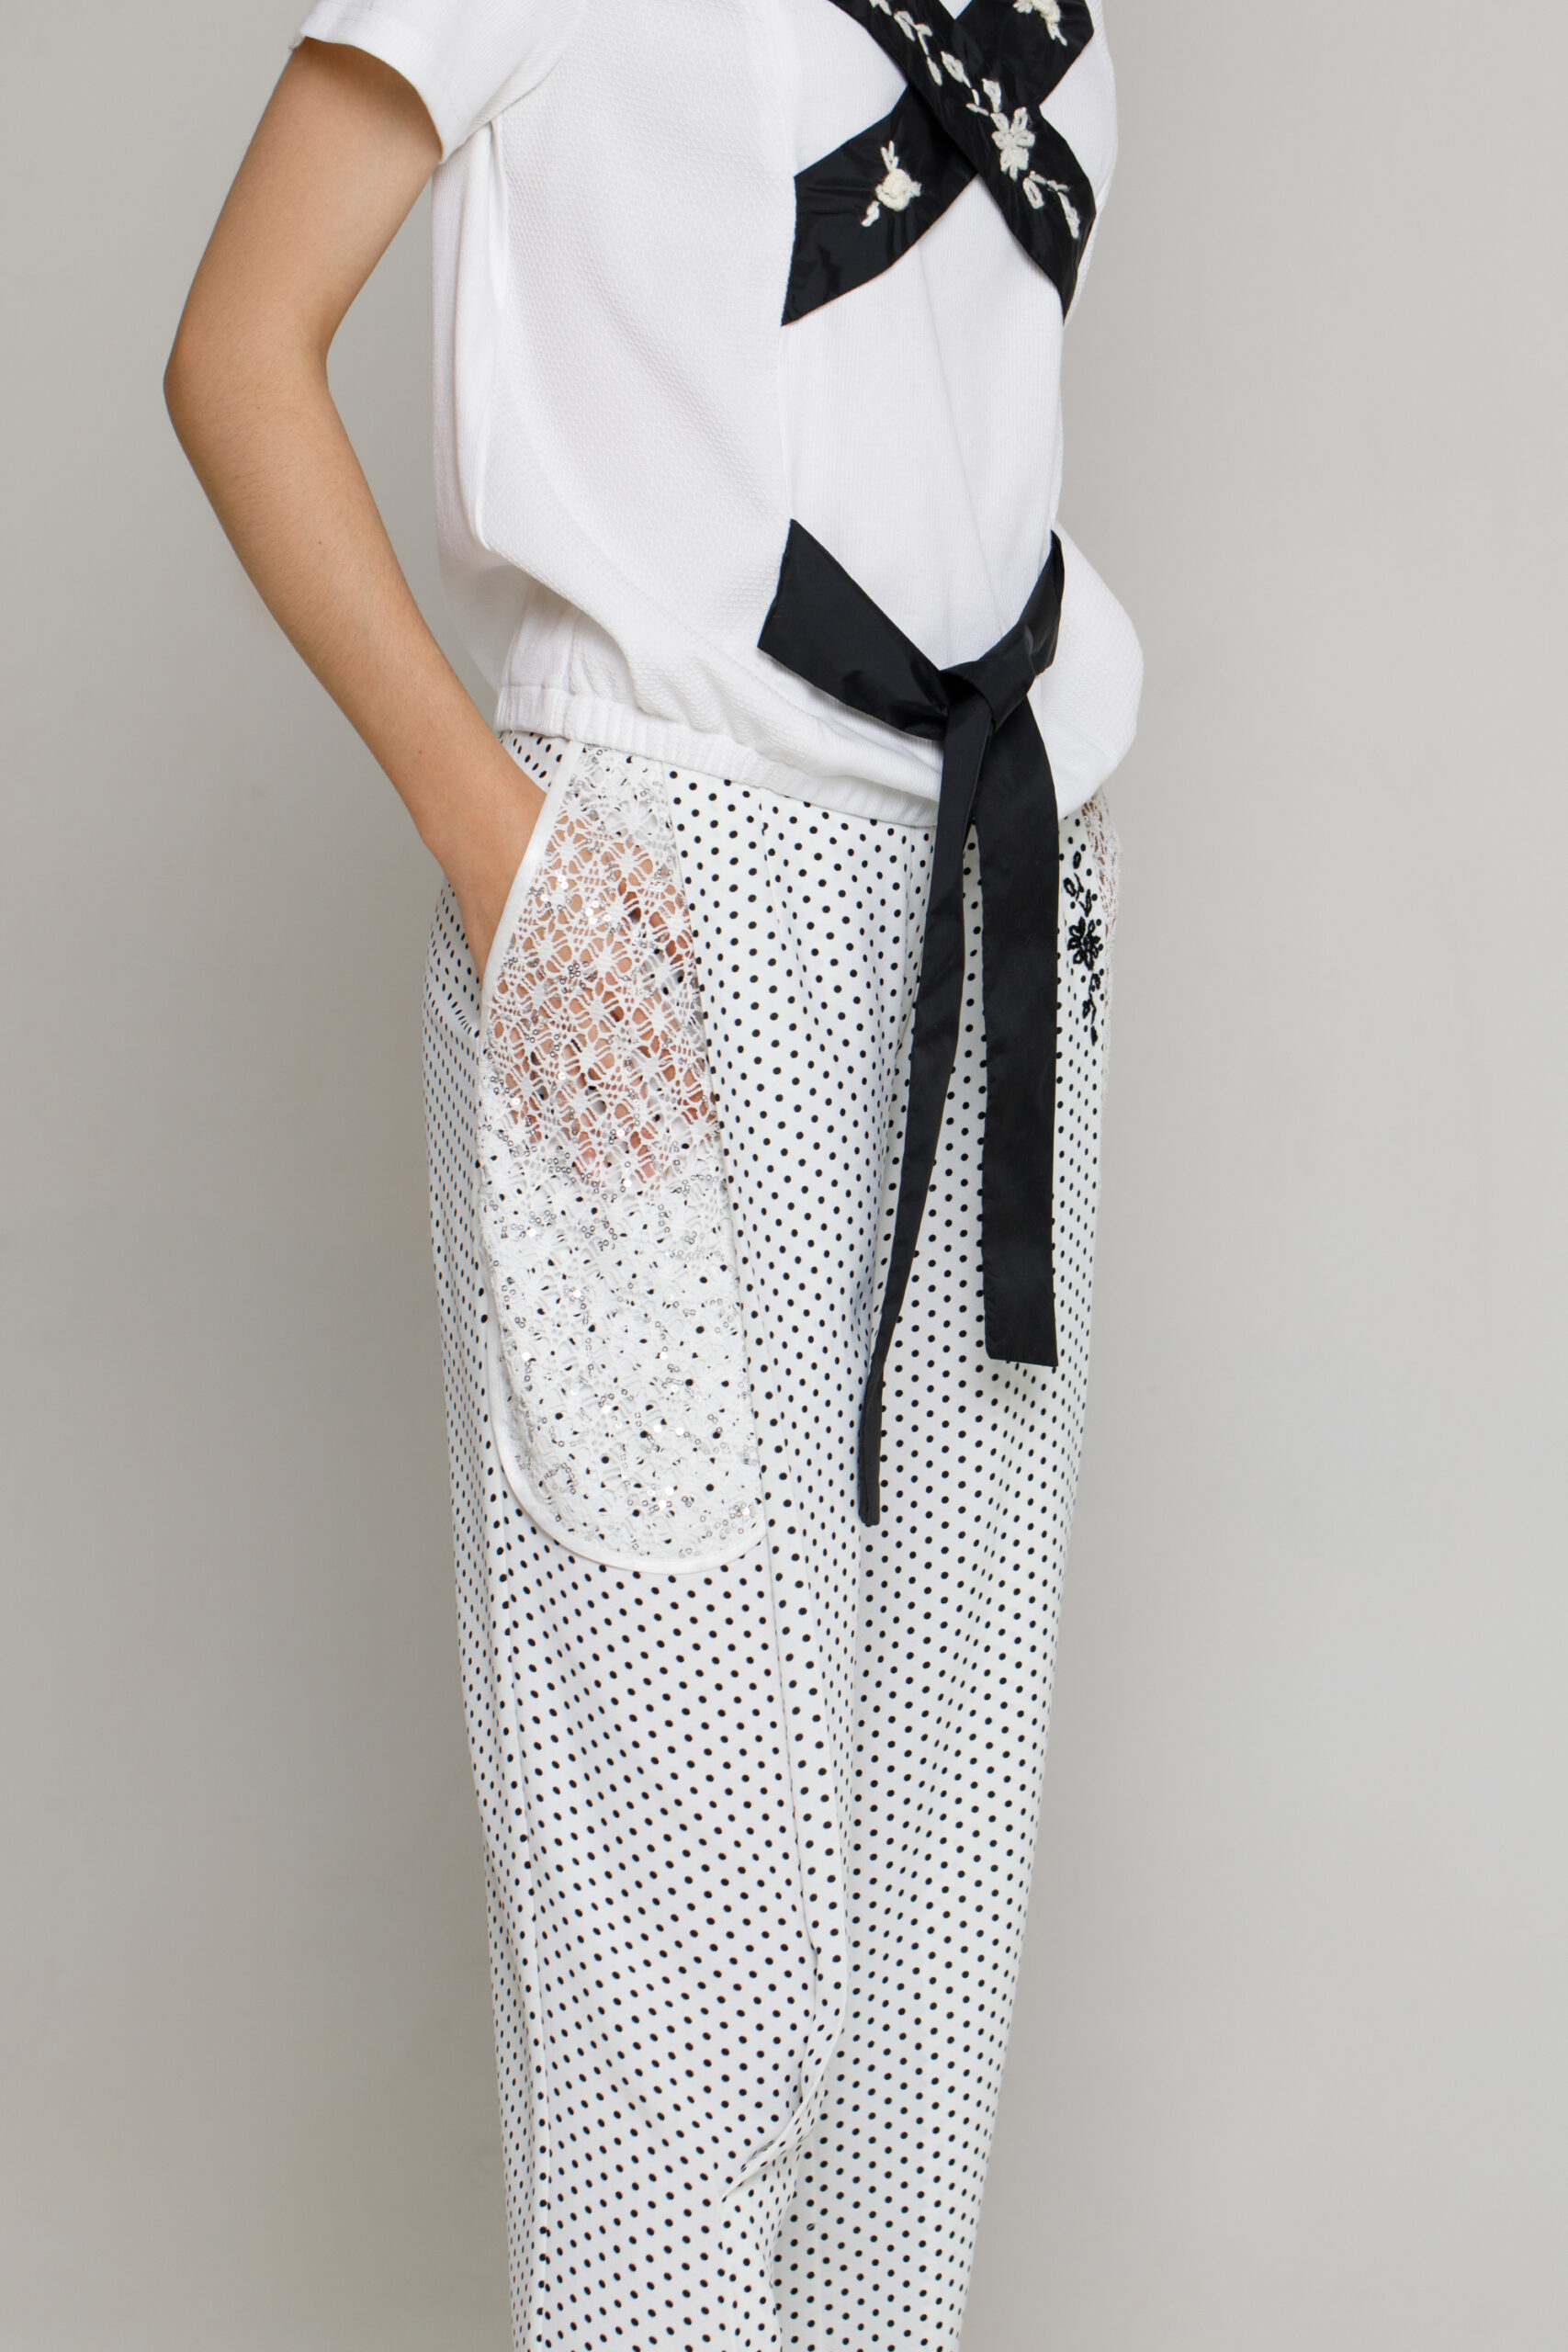 ROCO elegant white pants with polka dots and lace pocket. Natural fabrics, original design, handmade embroidery